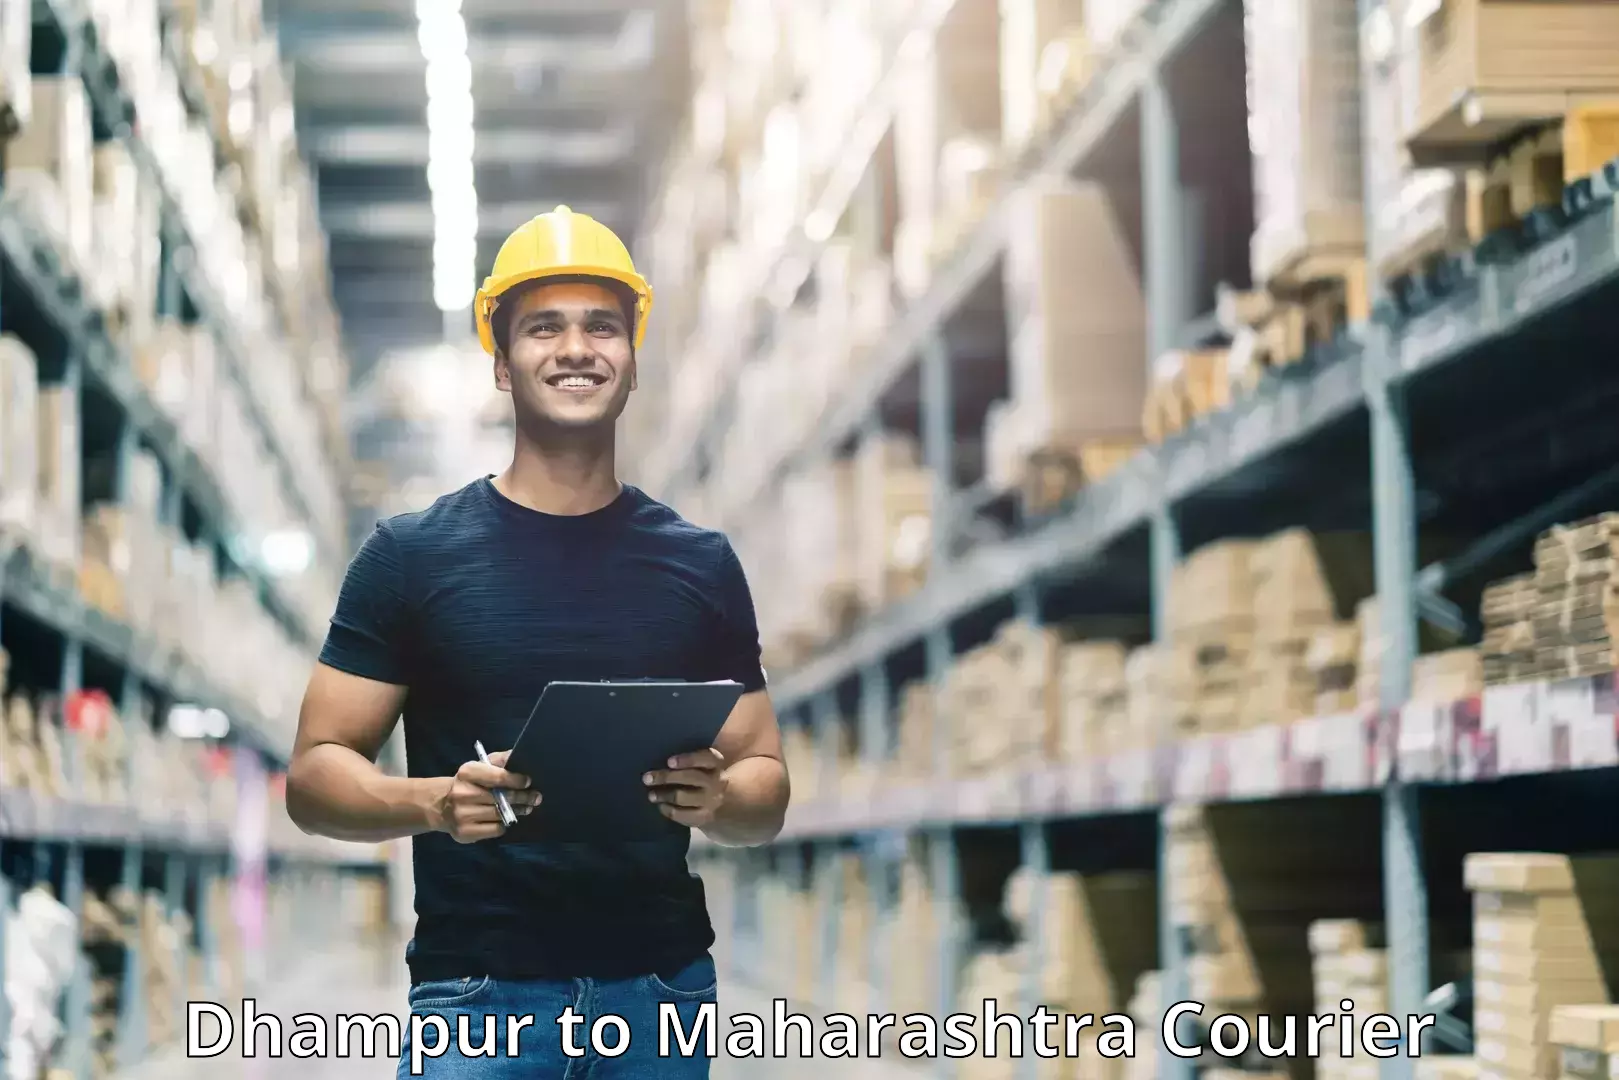 Customer-focused courier Dhampur to Maharashtra